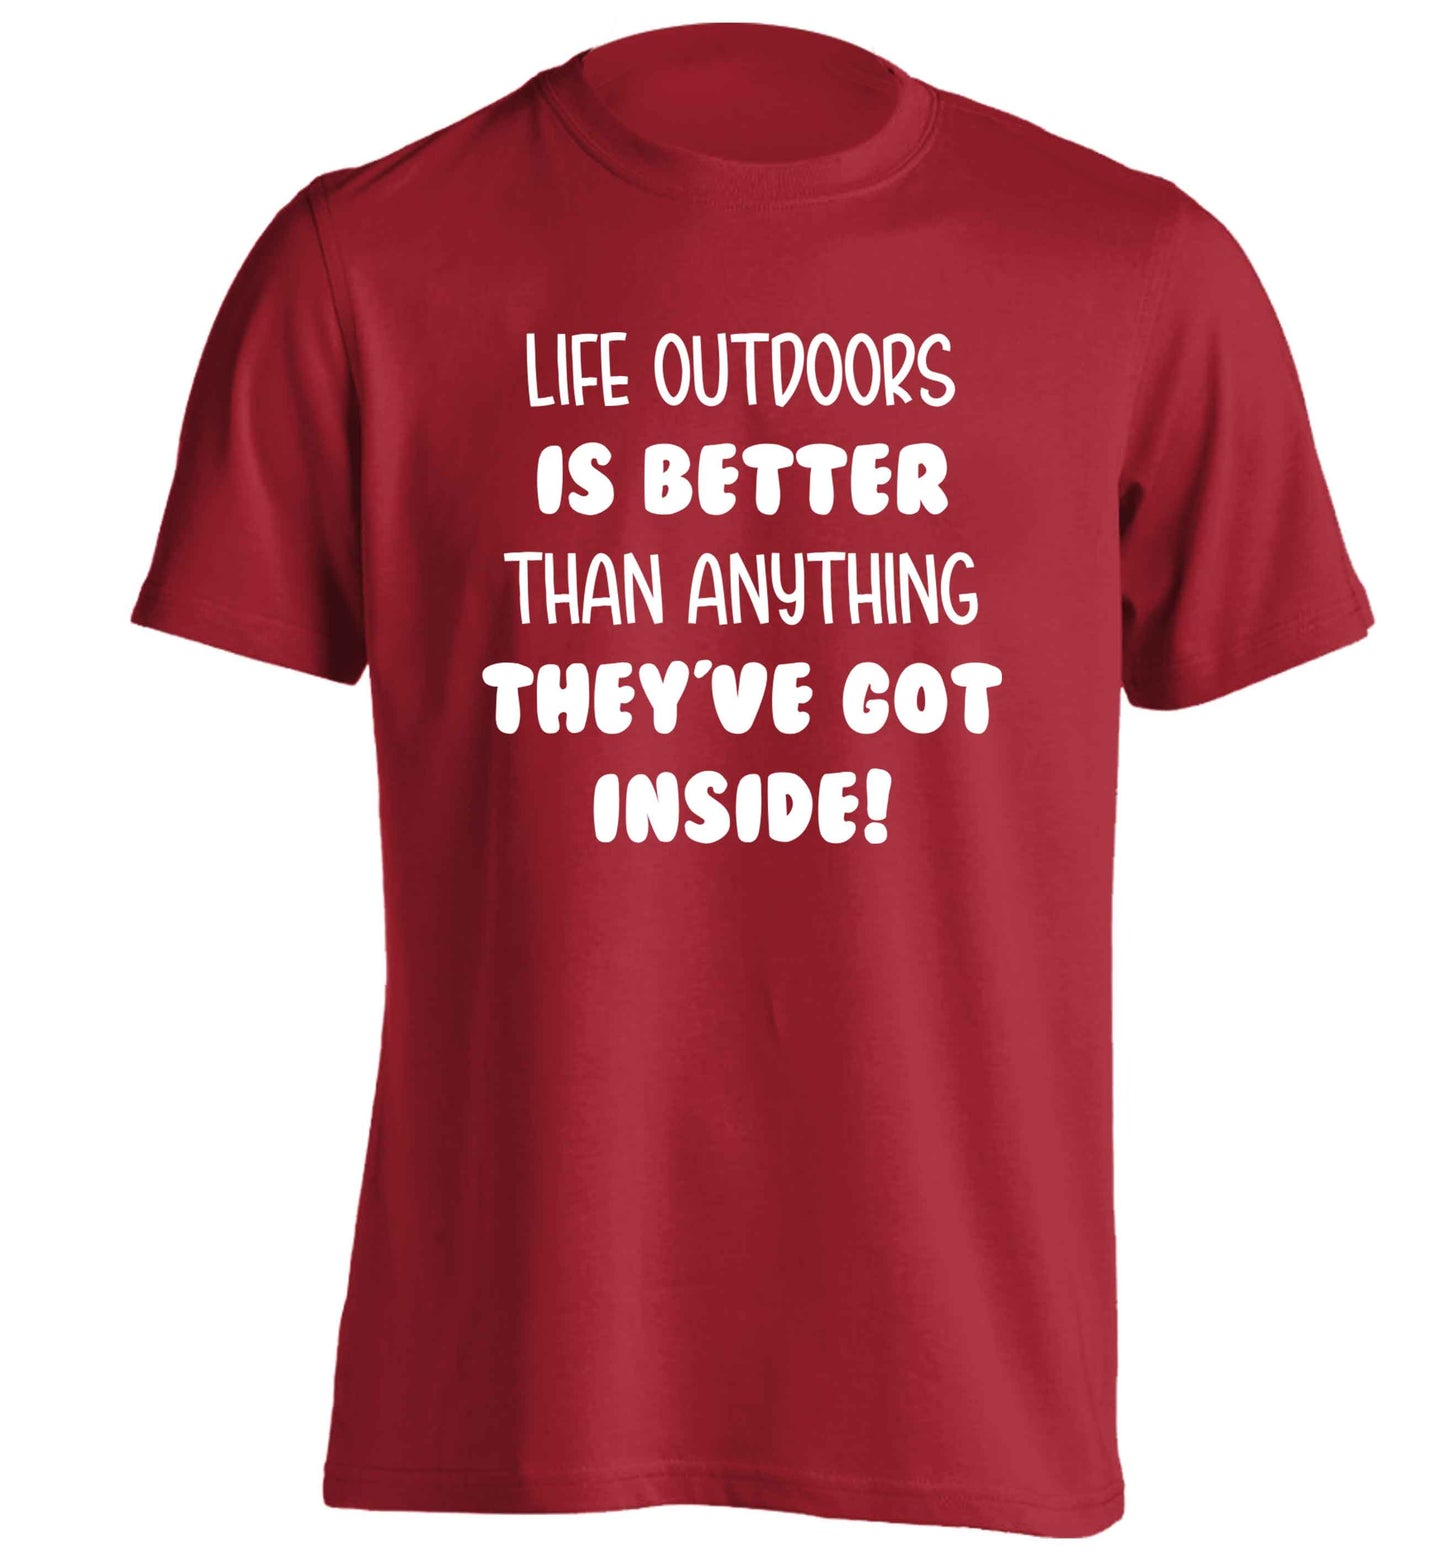 Life outdoors is better than anything they've go inside adults unisex red Tshirt 2XL